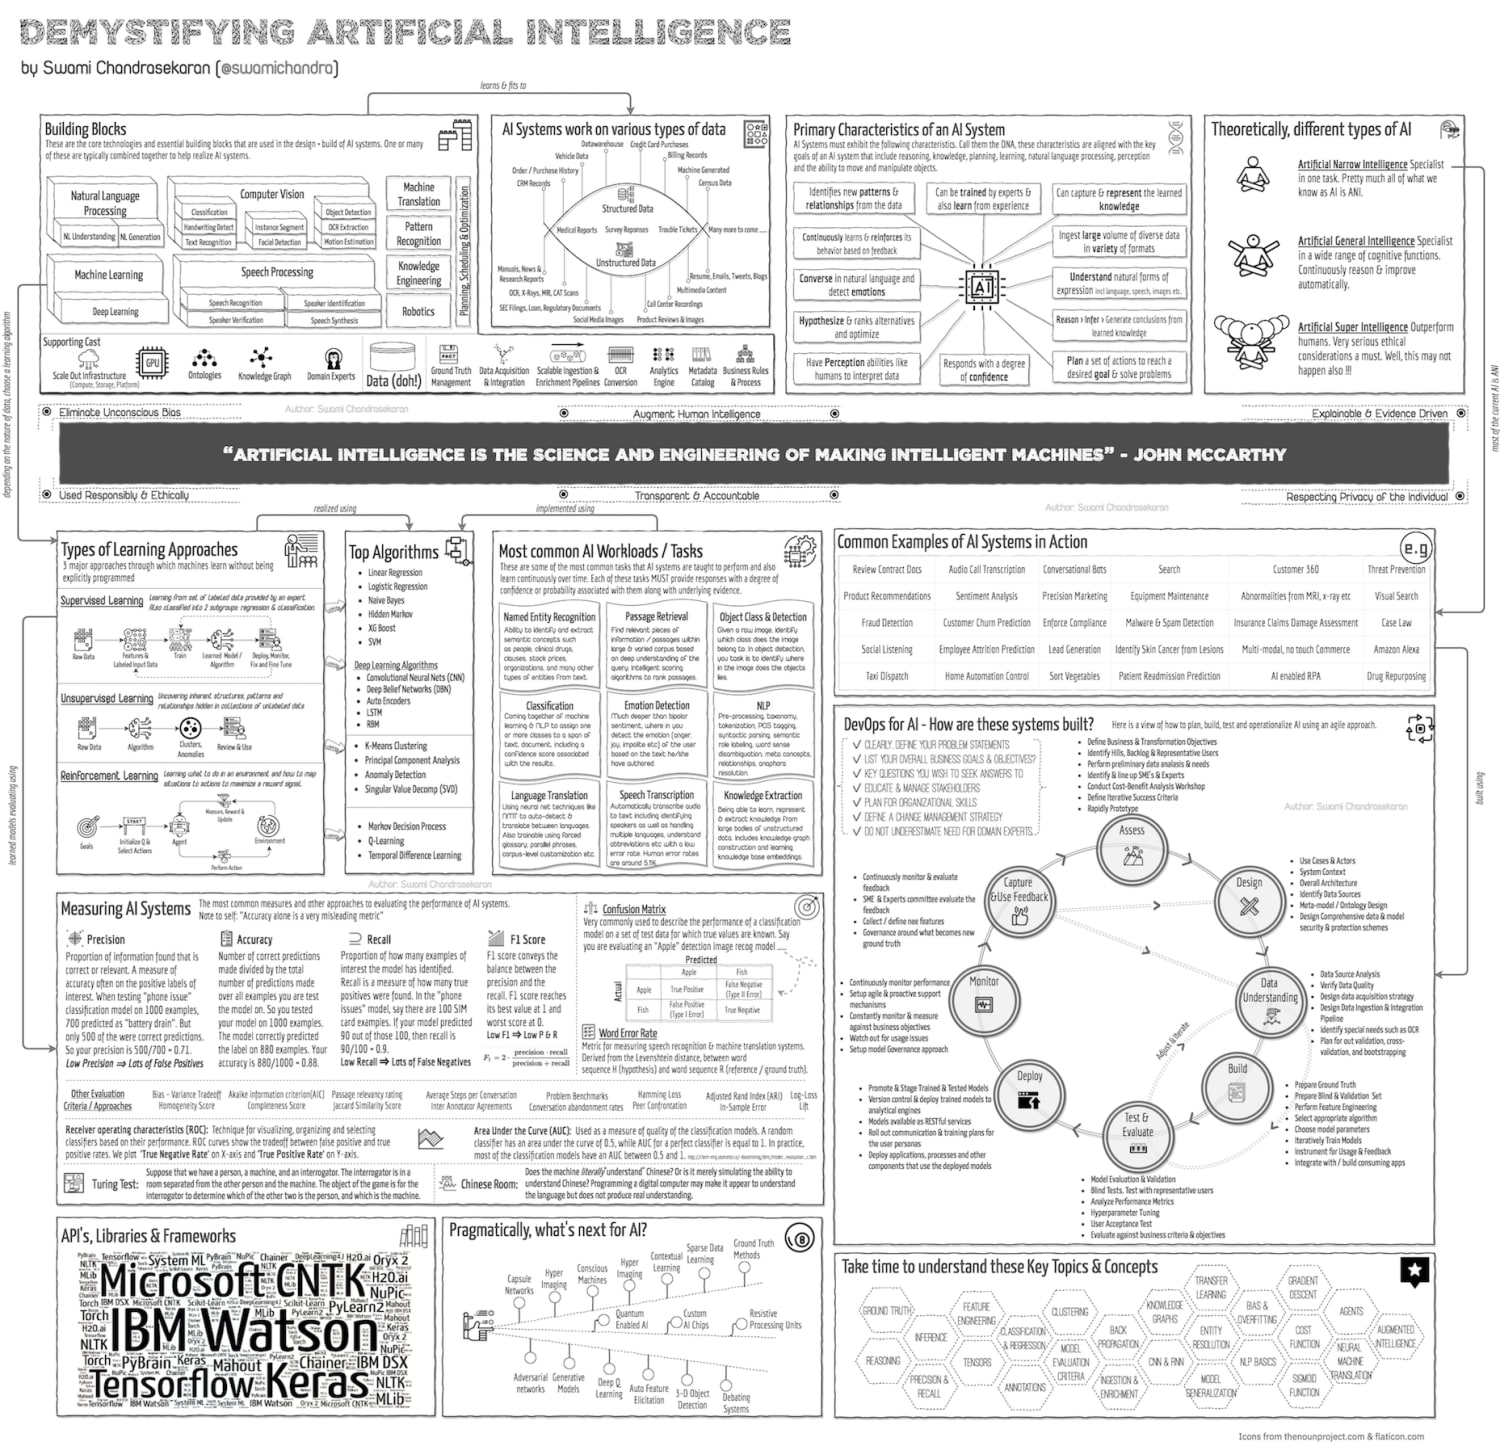 Demystifying Artificial Intelligence - Explained in One Picture - DataScienceCentral.com